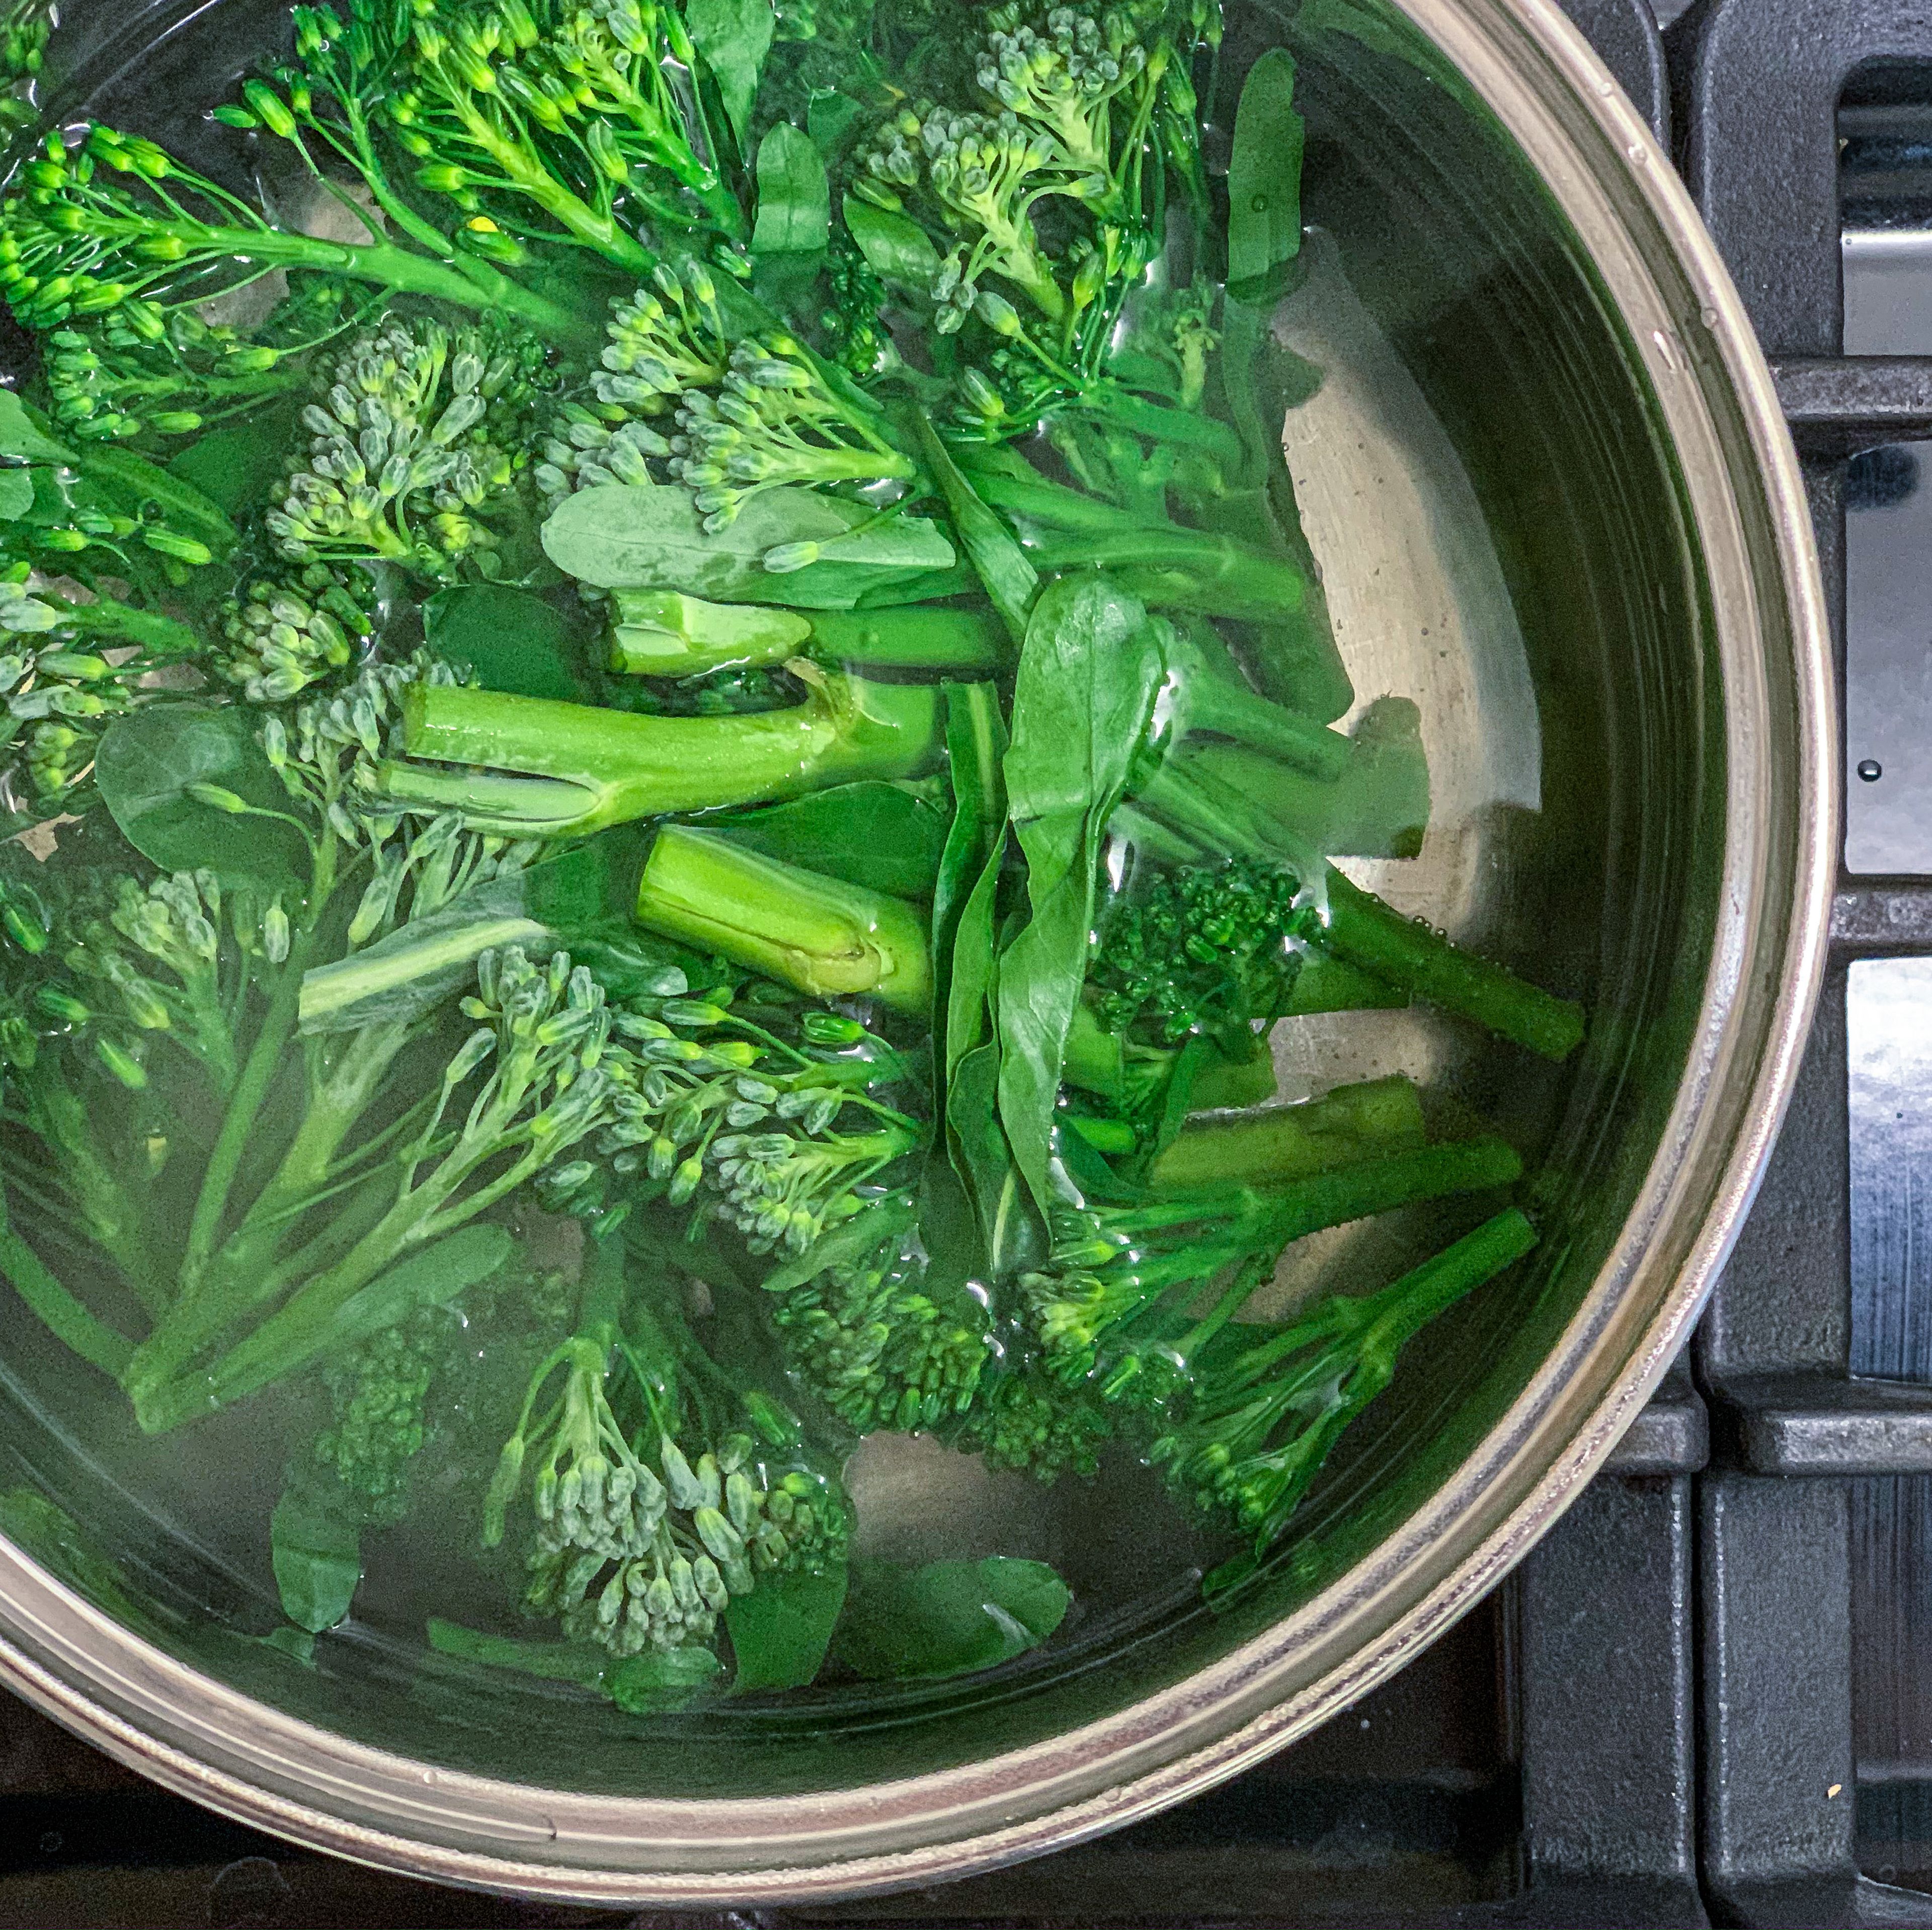 Boil Chinese Broccoli (Tenderstem Broccoli) for 5-8 minutes.